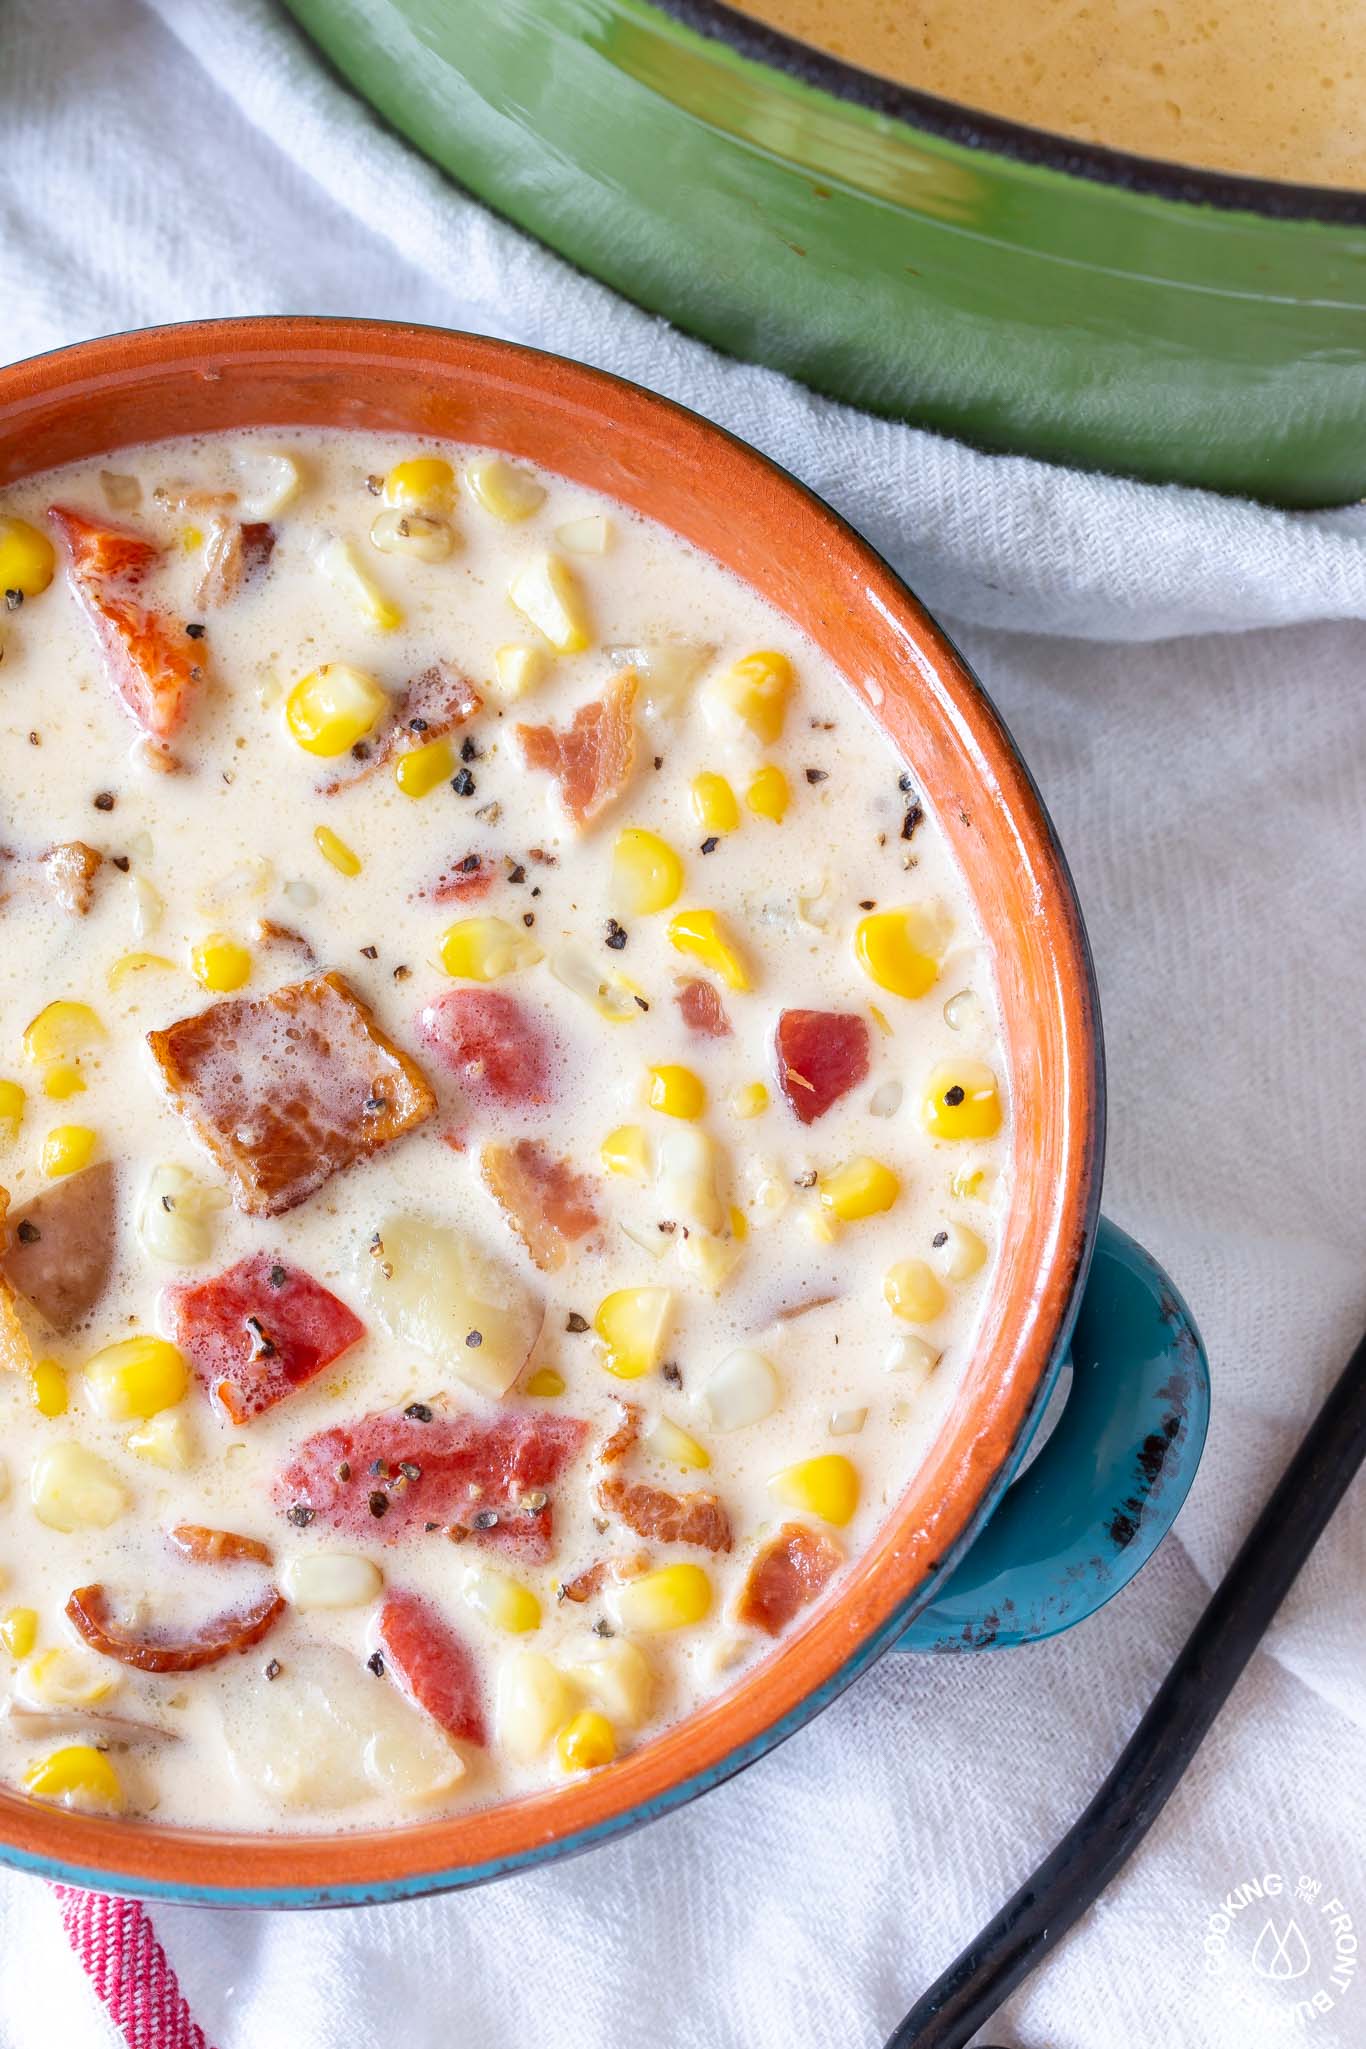 The dish: Corn chowder served at Whole Foods Market is as healthy as the  ingredient list makes it sound